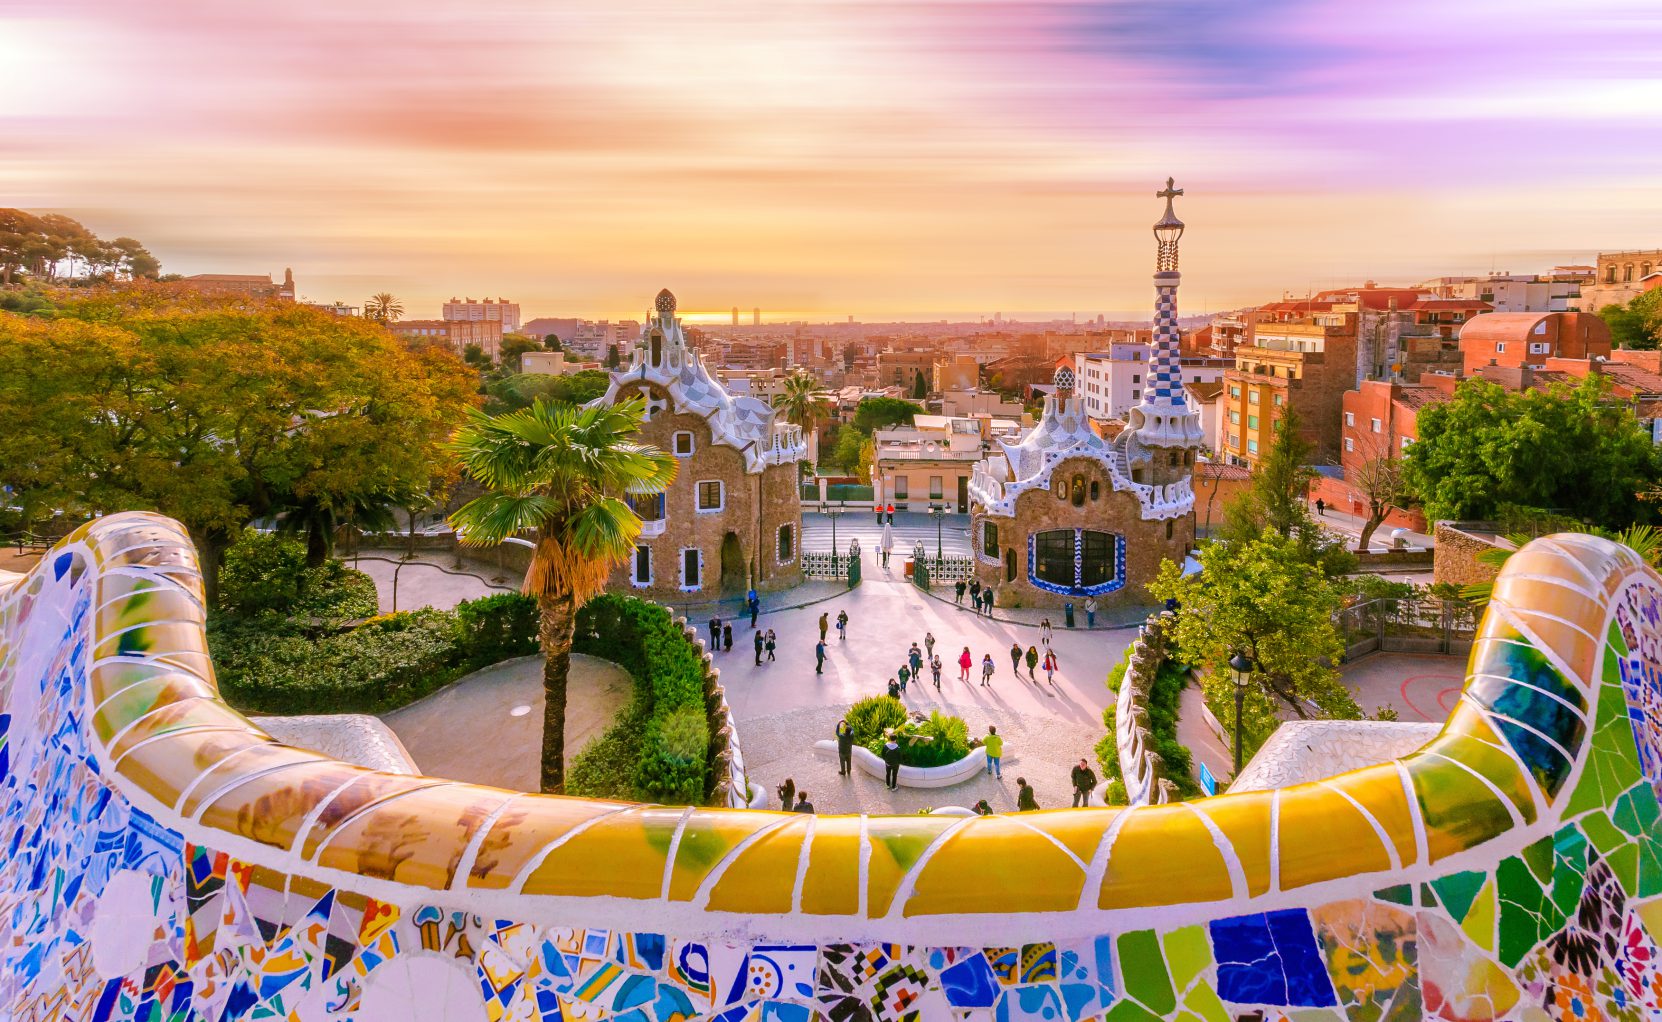 The city of Park Guell in Barcelona. 